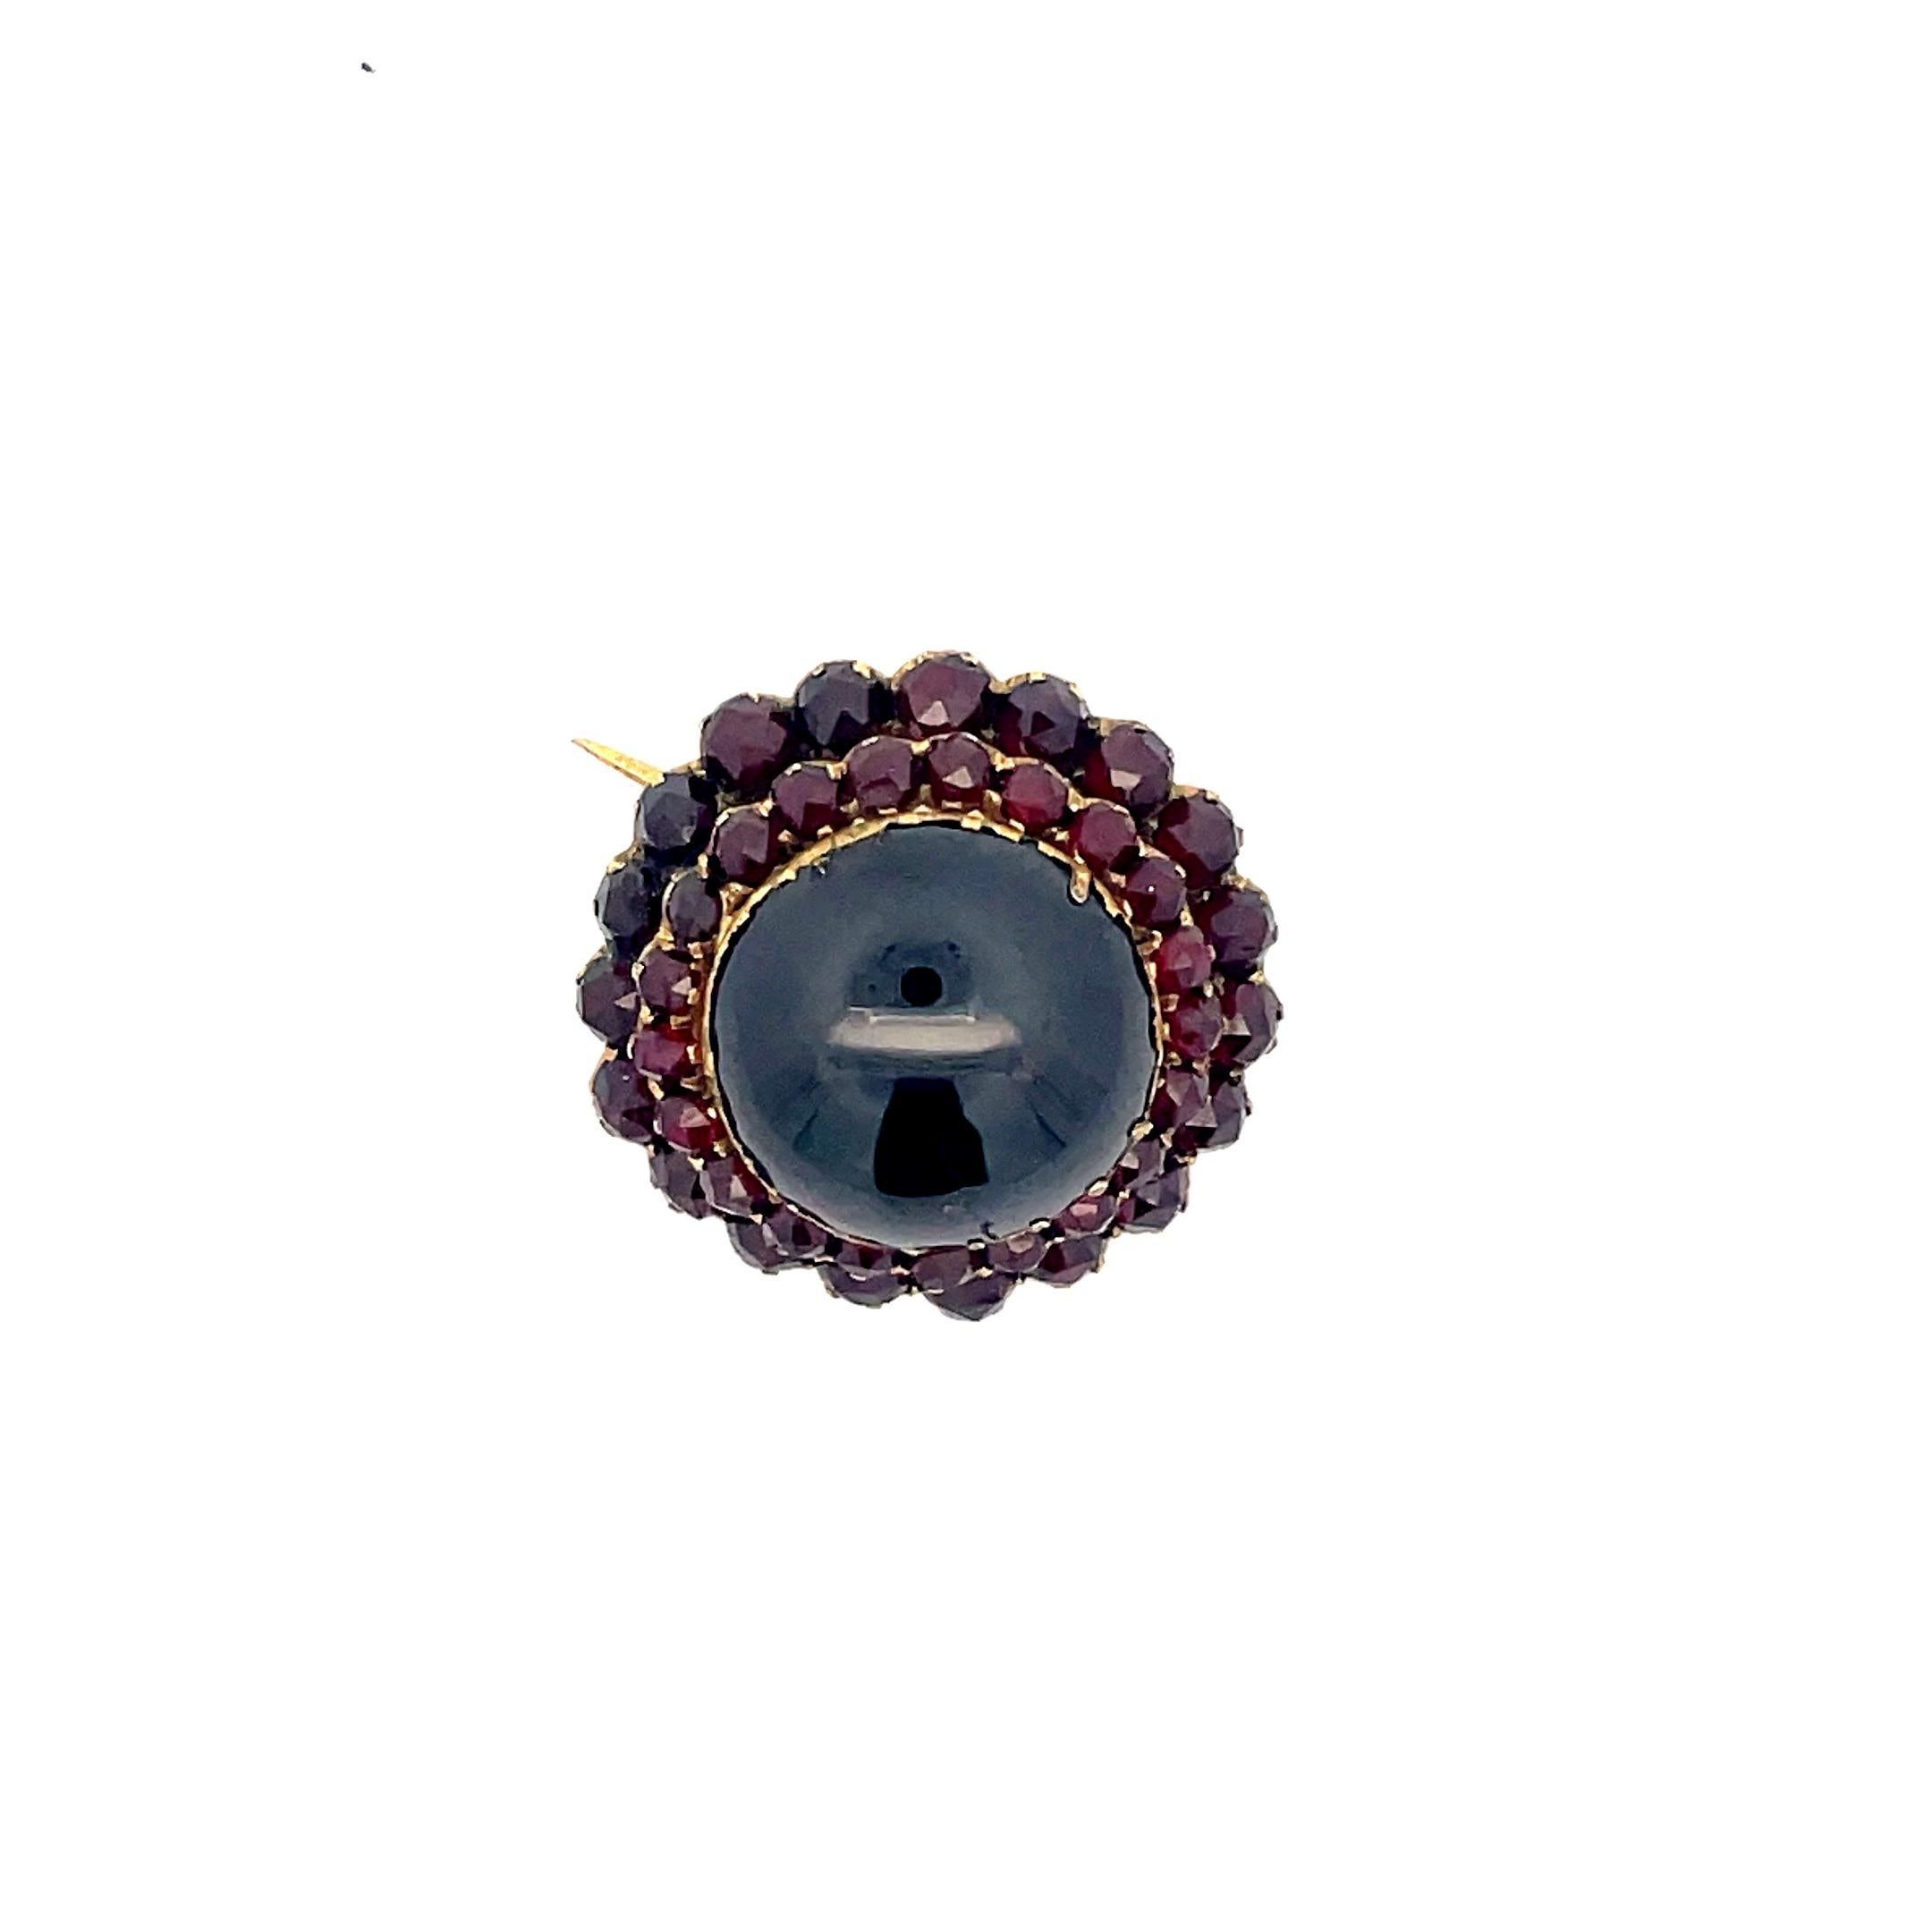 1880 Victorian Gold over Silver Cabochon Garnet Pin/Pendant  In Excellent Condition For Sale In Lexington, KY